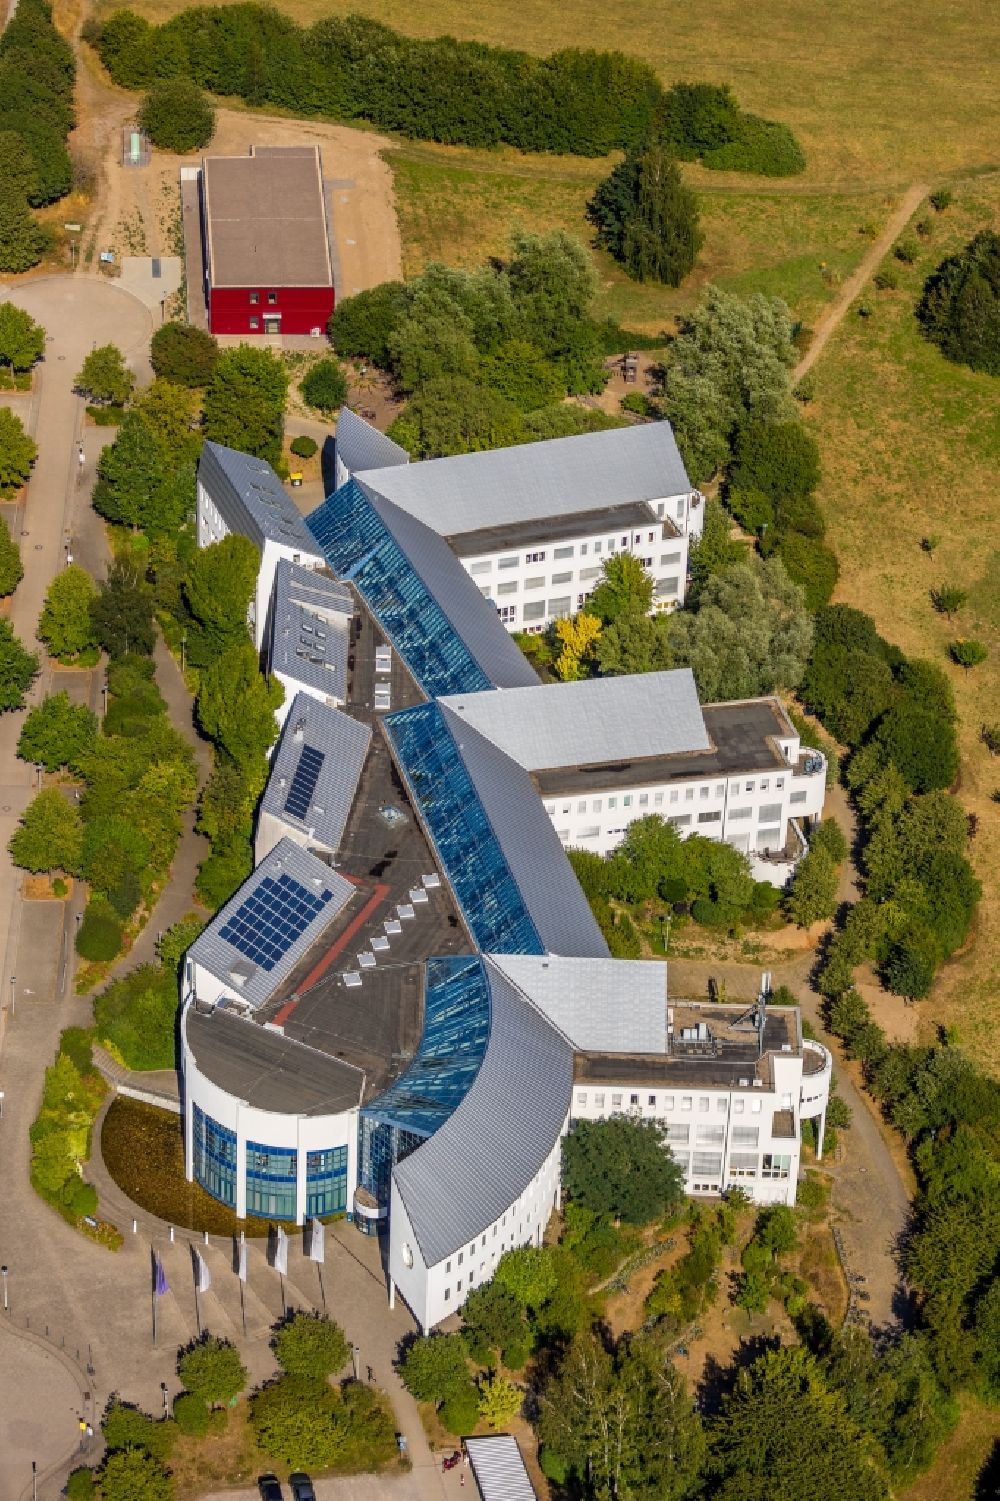 Aerial photograph Witten - Campus building of the private university Witten/Herdecke in Witten in the state of North Rhine-Westphalia